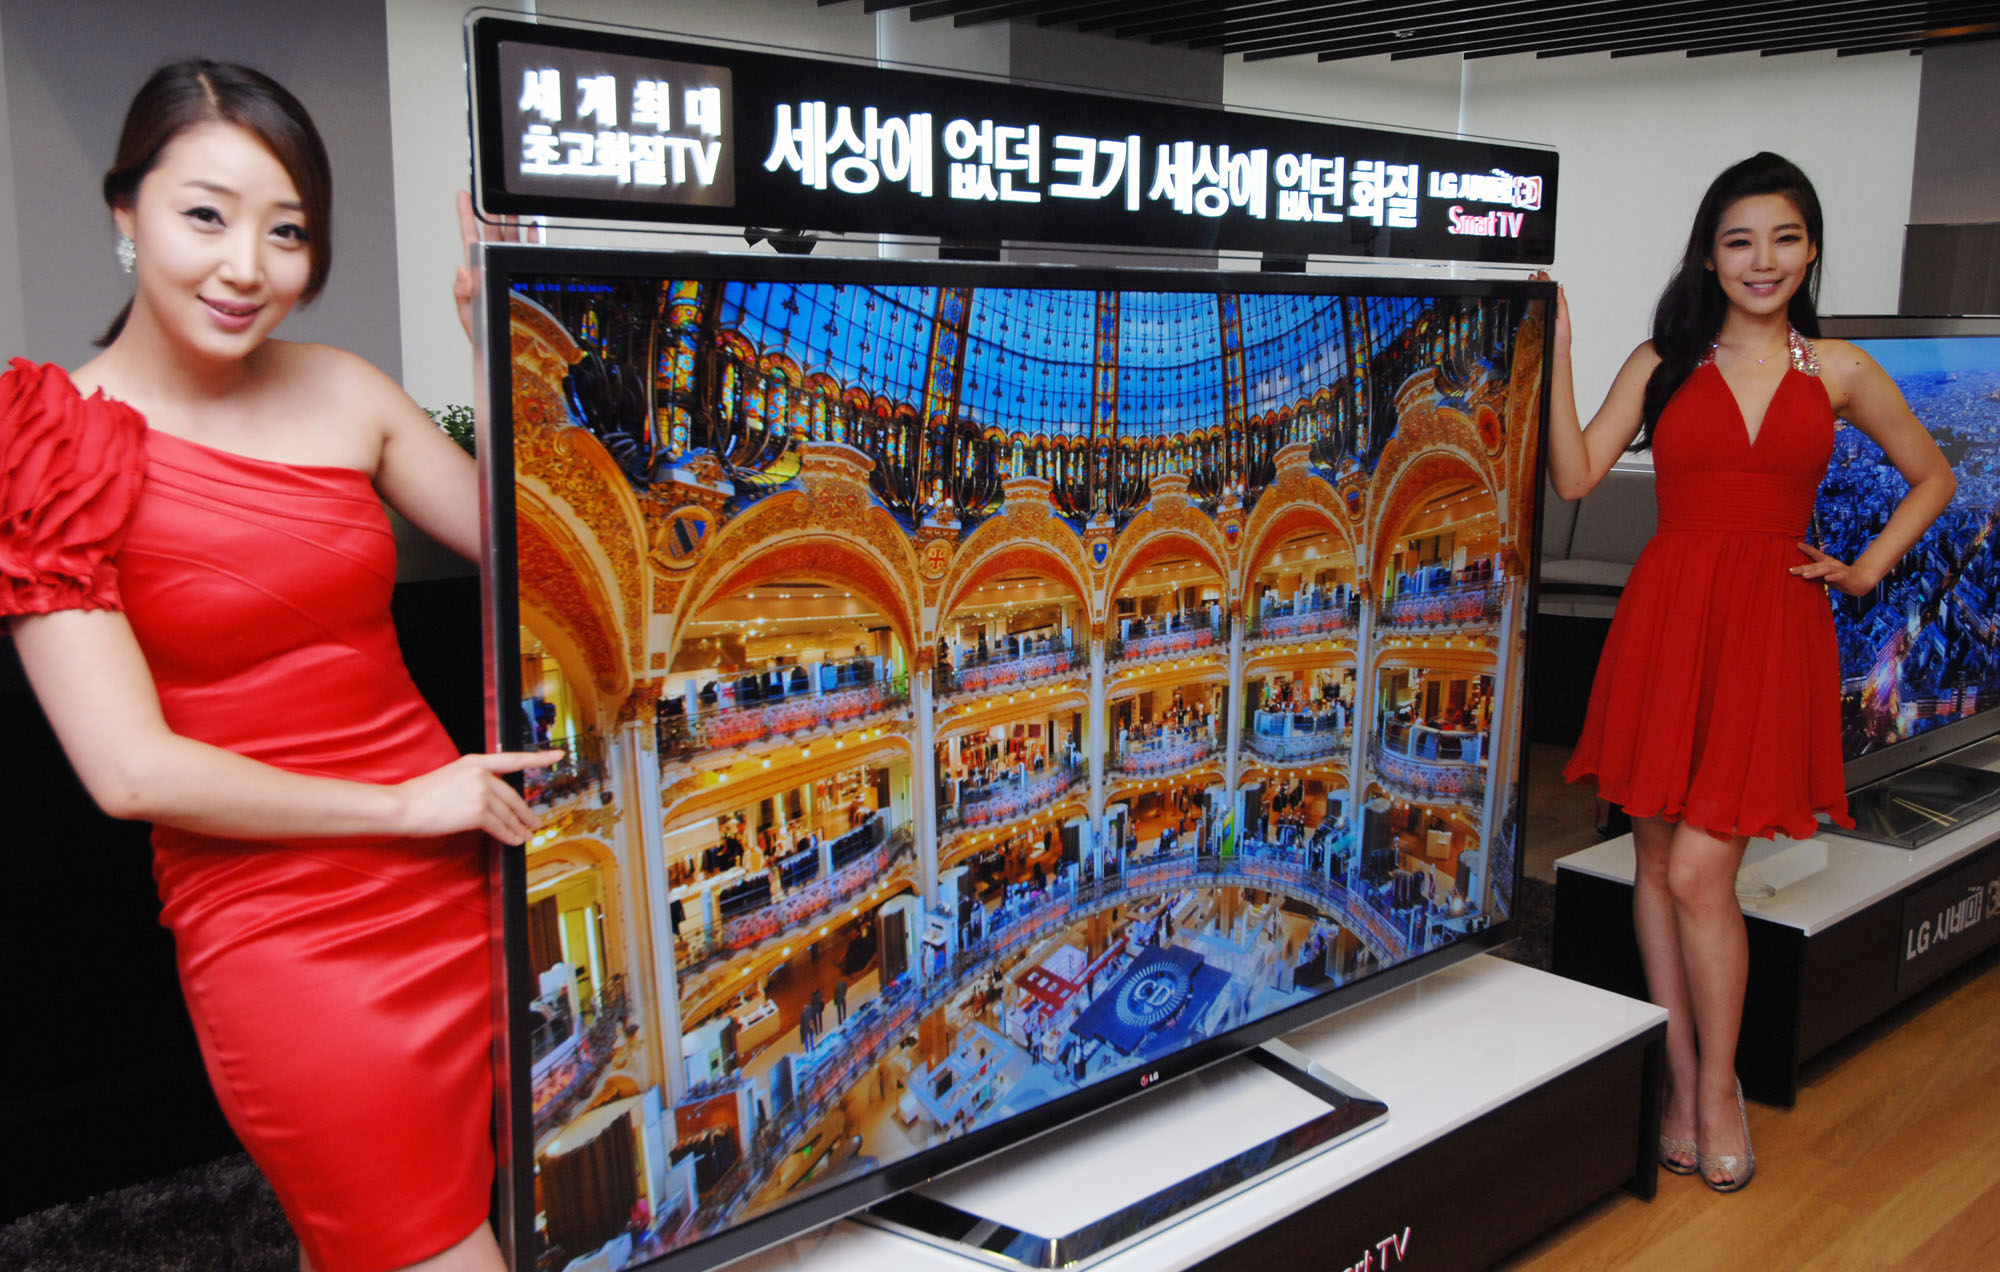 A side view of two models presenting the world’s first 84-inch Ultra Definition 3D TV by LG